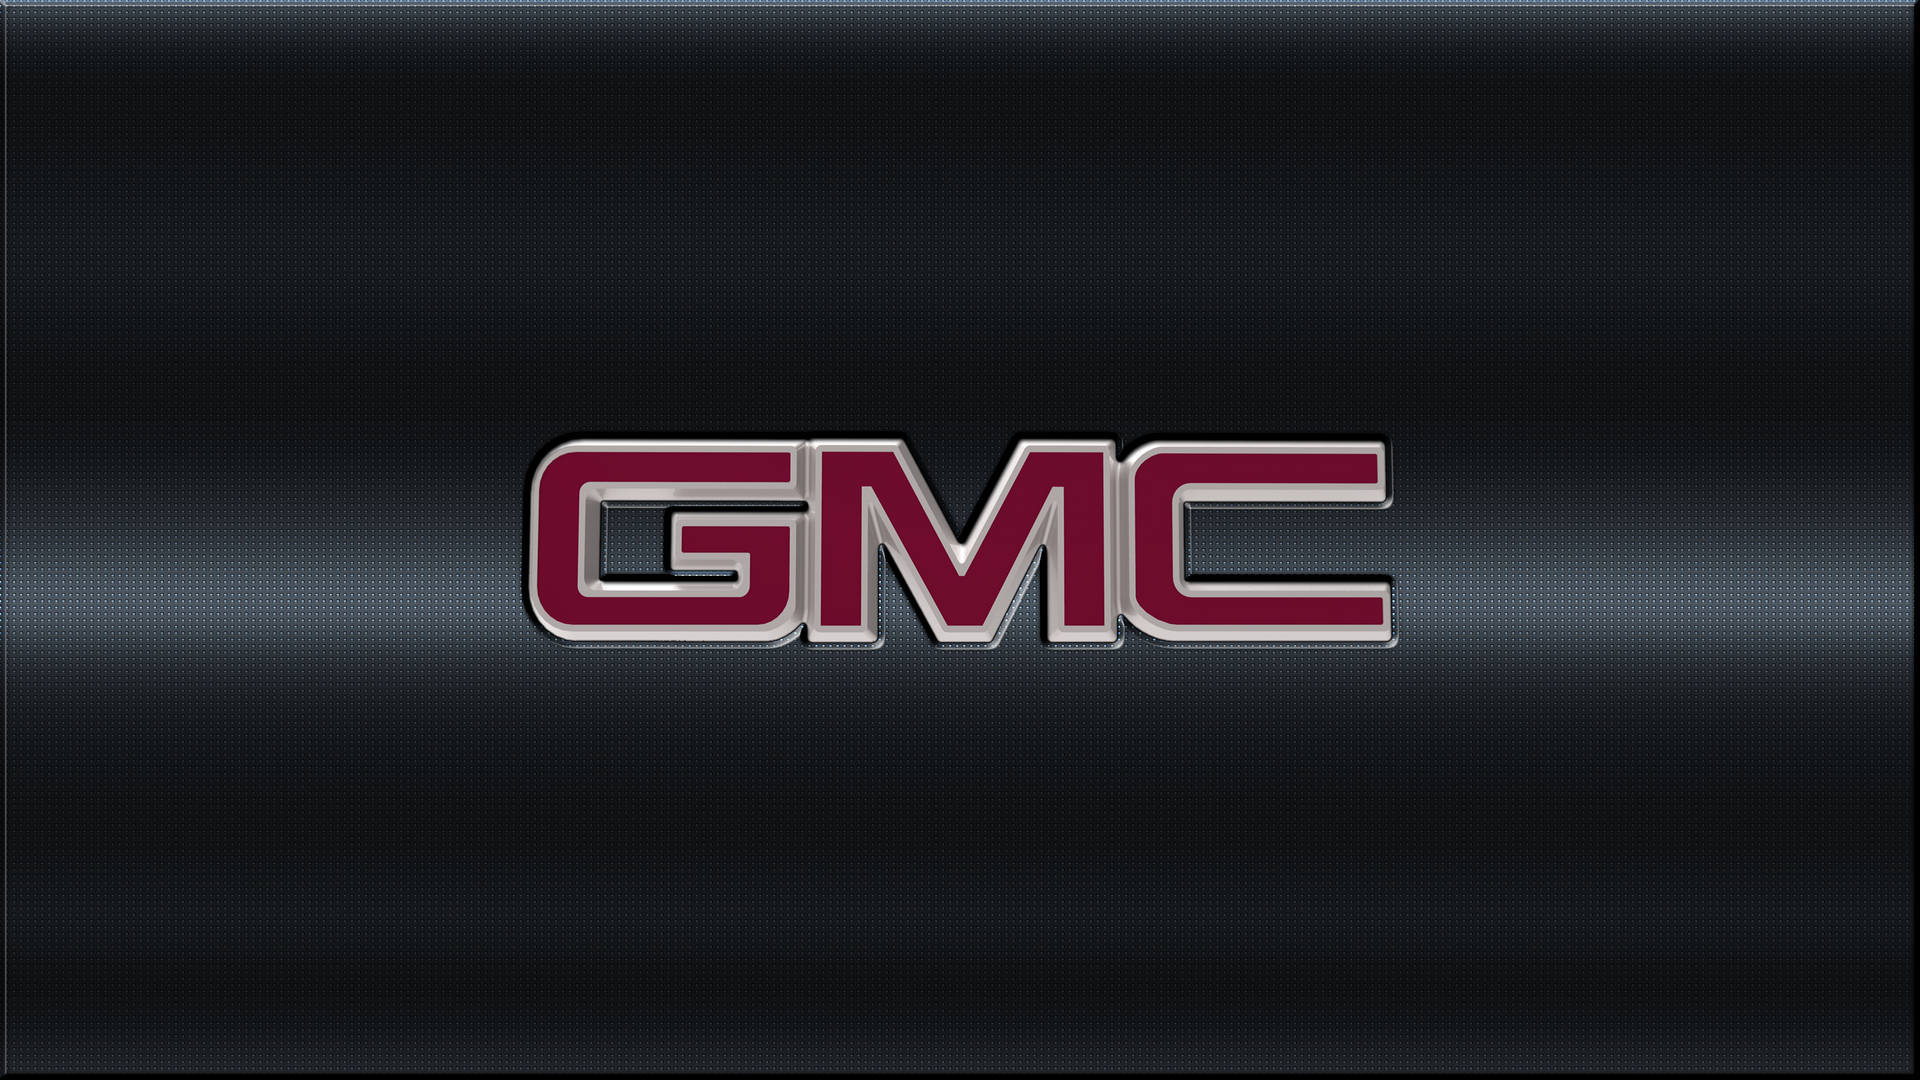 Gmc Company Logo On An Abstract Background